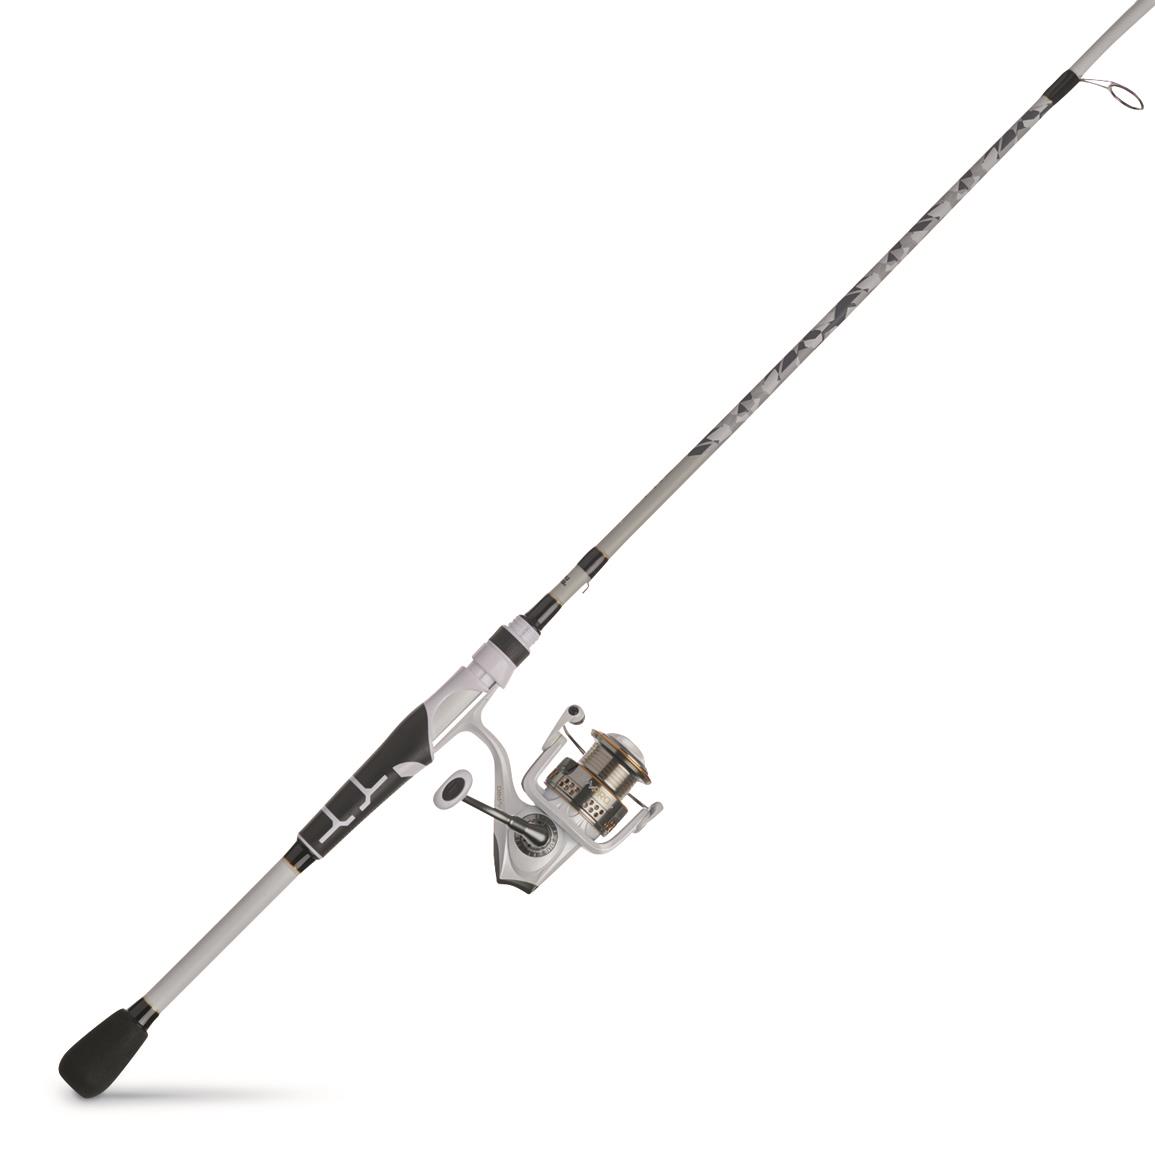 Casting Rod & Reel Combos and Baitcasting Combos